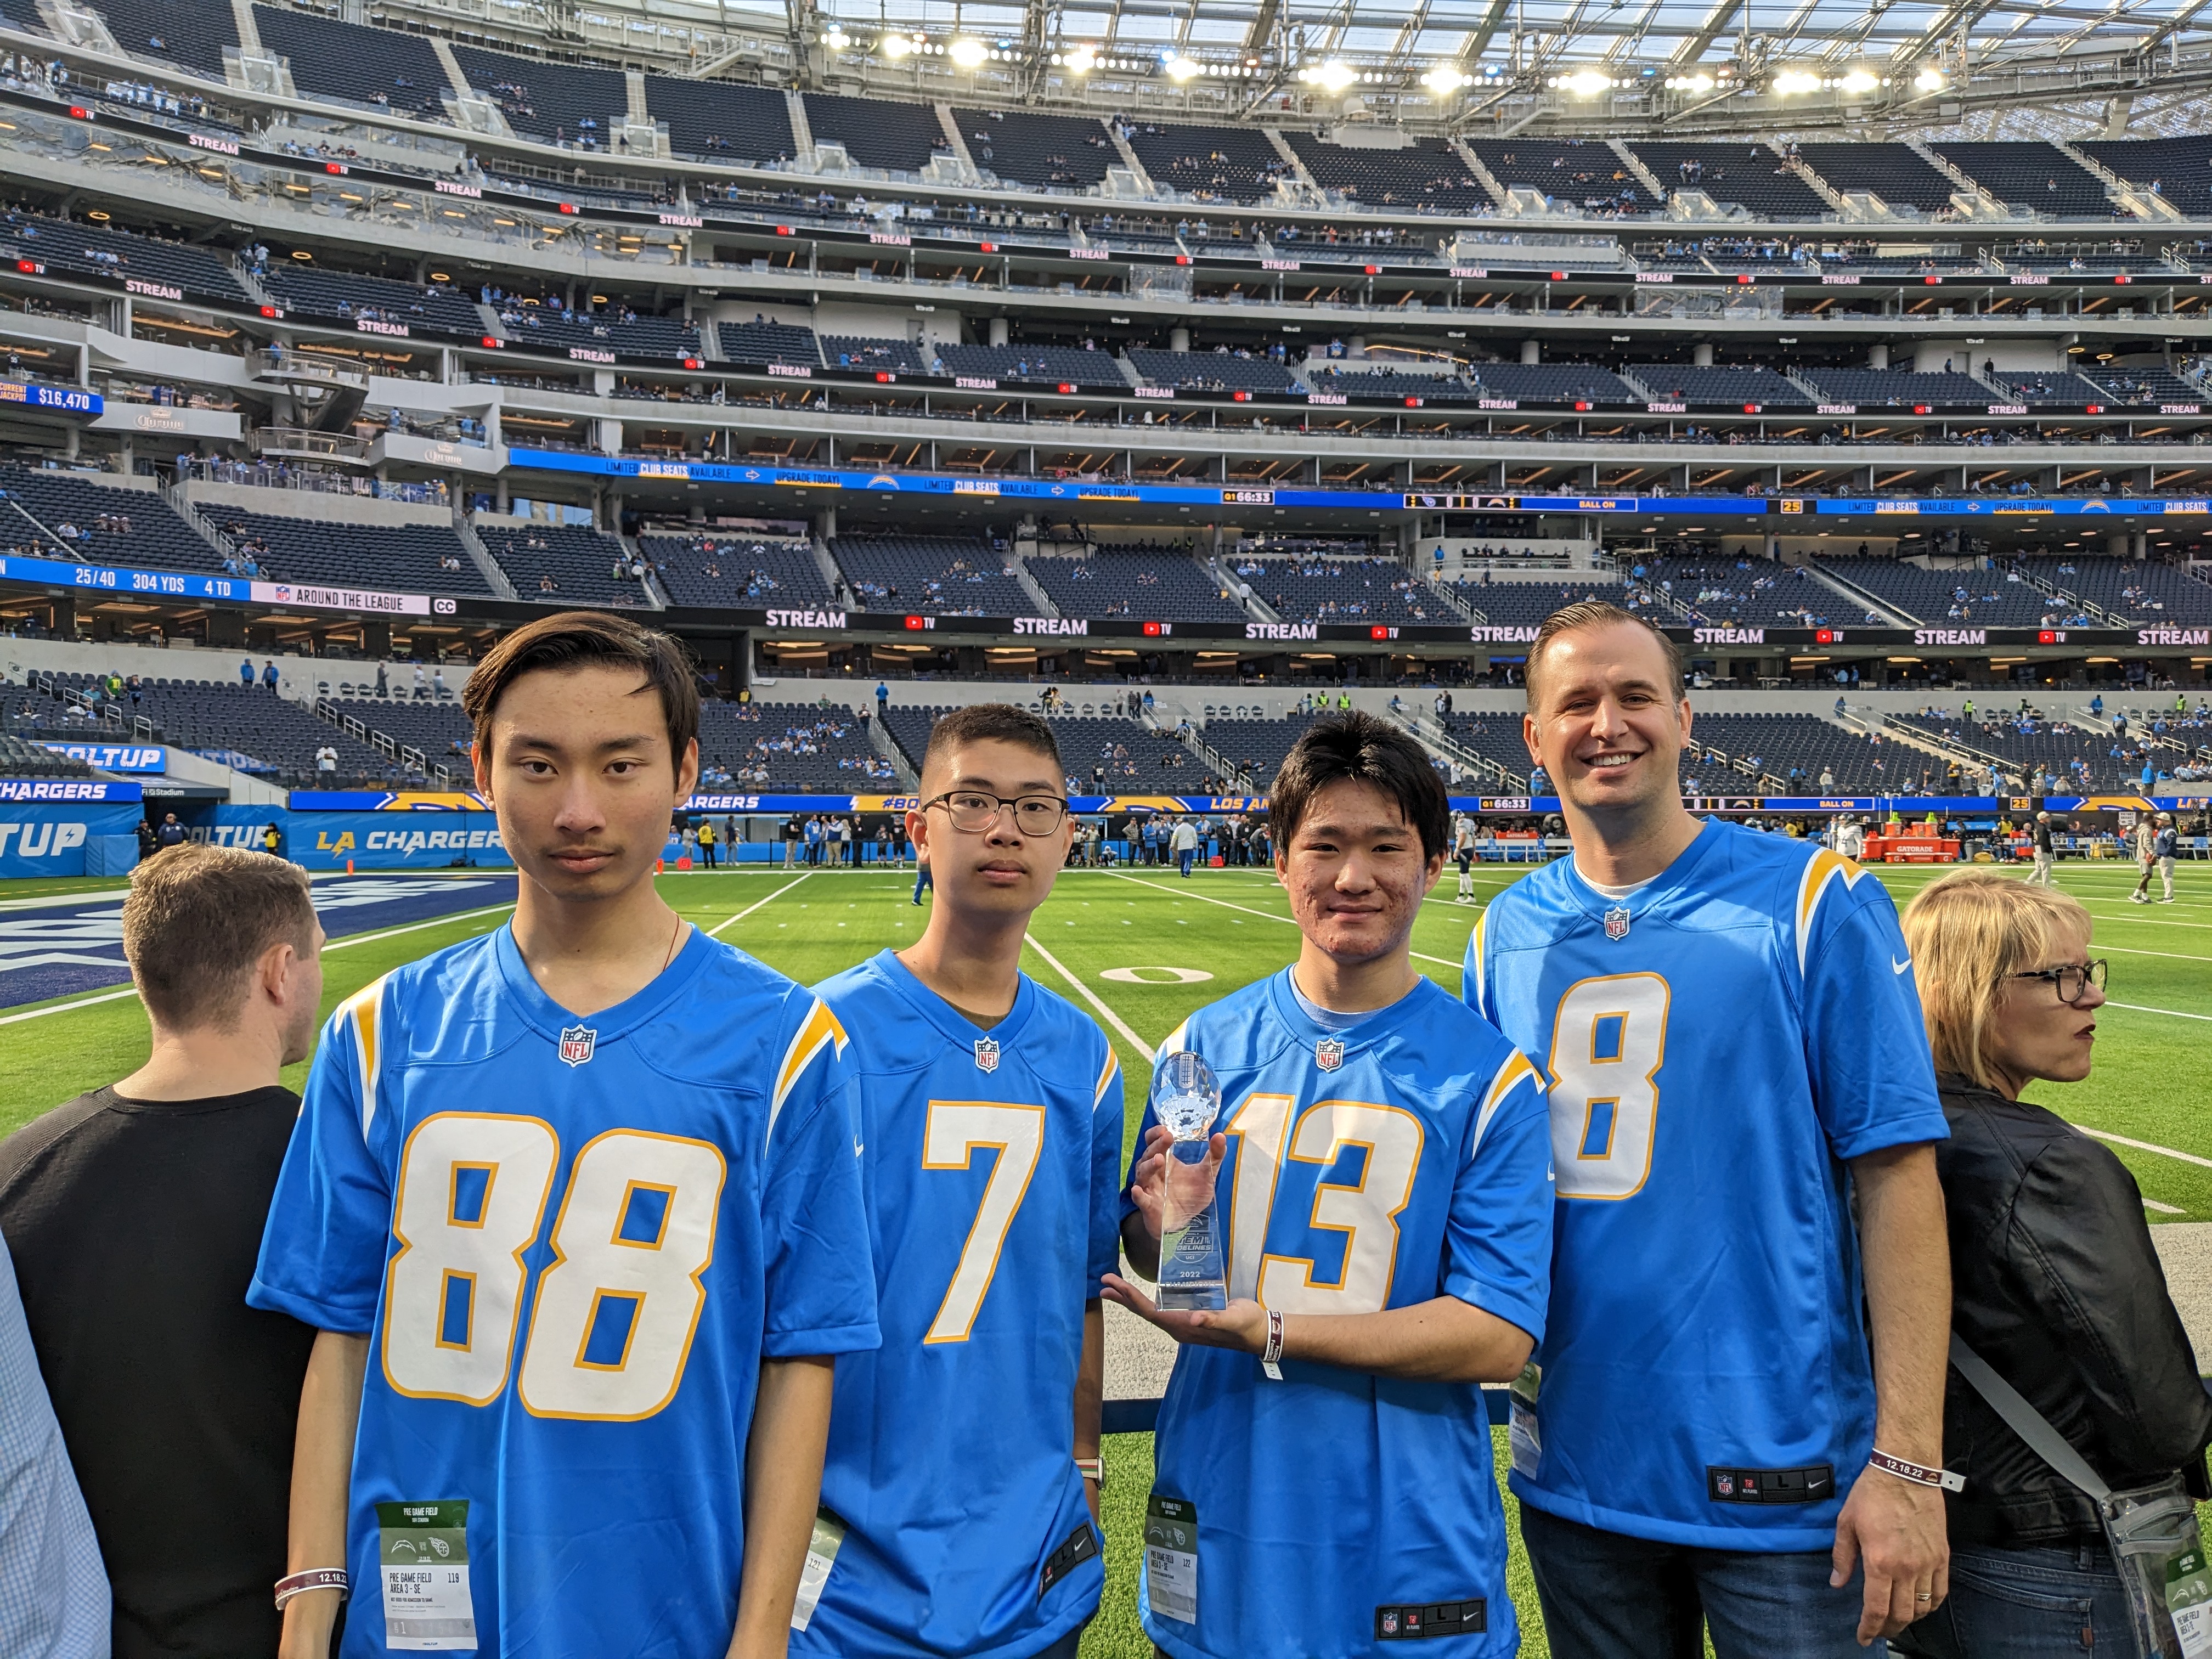 Students at Chargers game